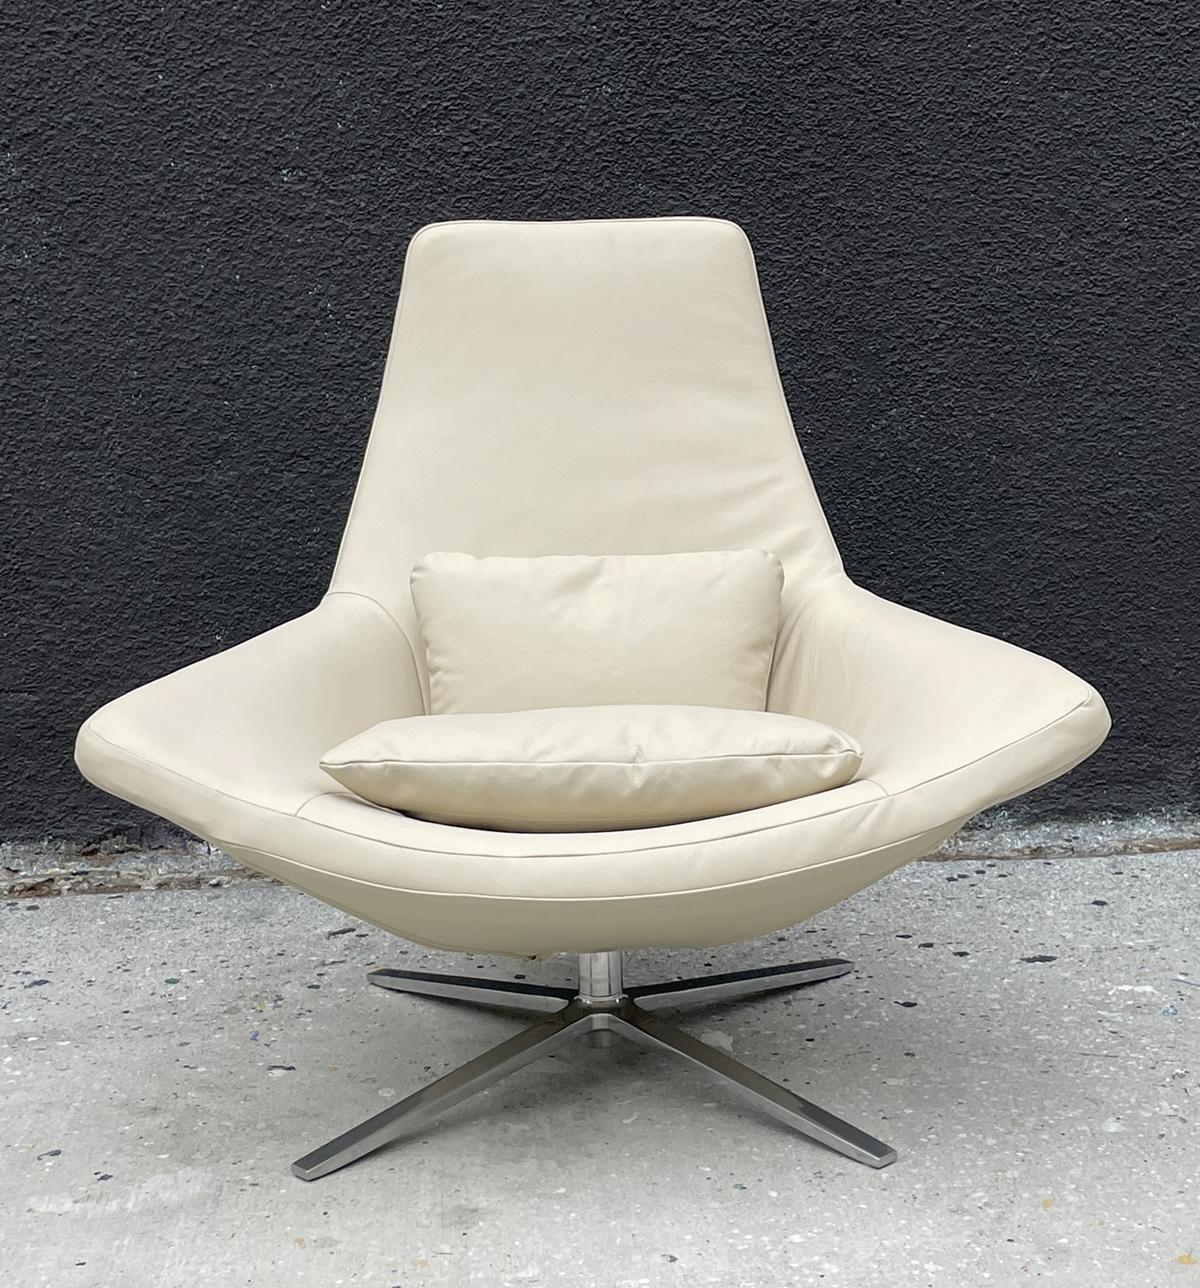 Armchair designed by Jeffrey Bernet and manufactured in Italy by B&B italy.

The chair was produced in 2002 and we just had it reupholstered in a beautiful cream leather.
The seat that flows uninterruptedly into the armrests is the hallmark of